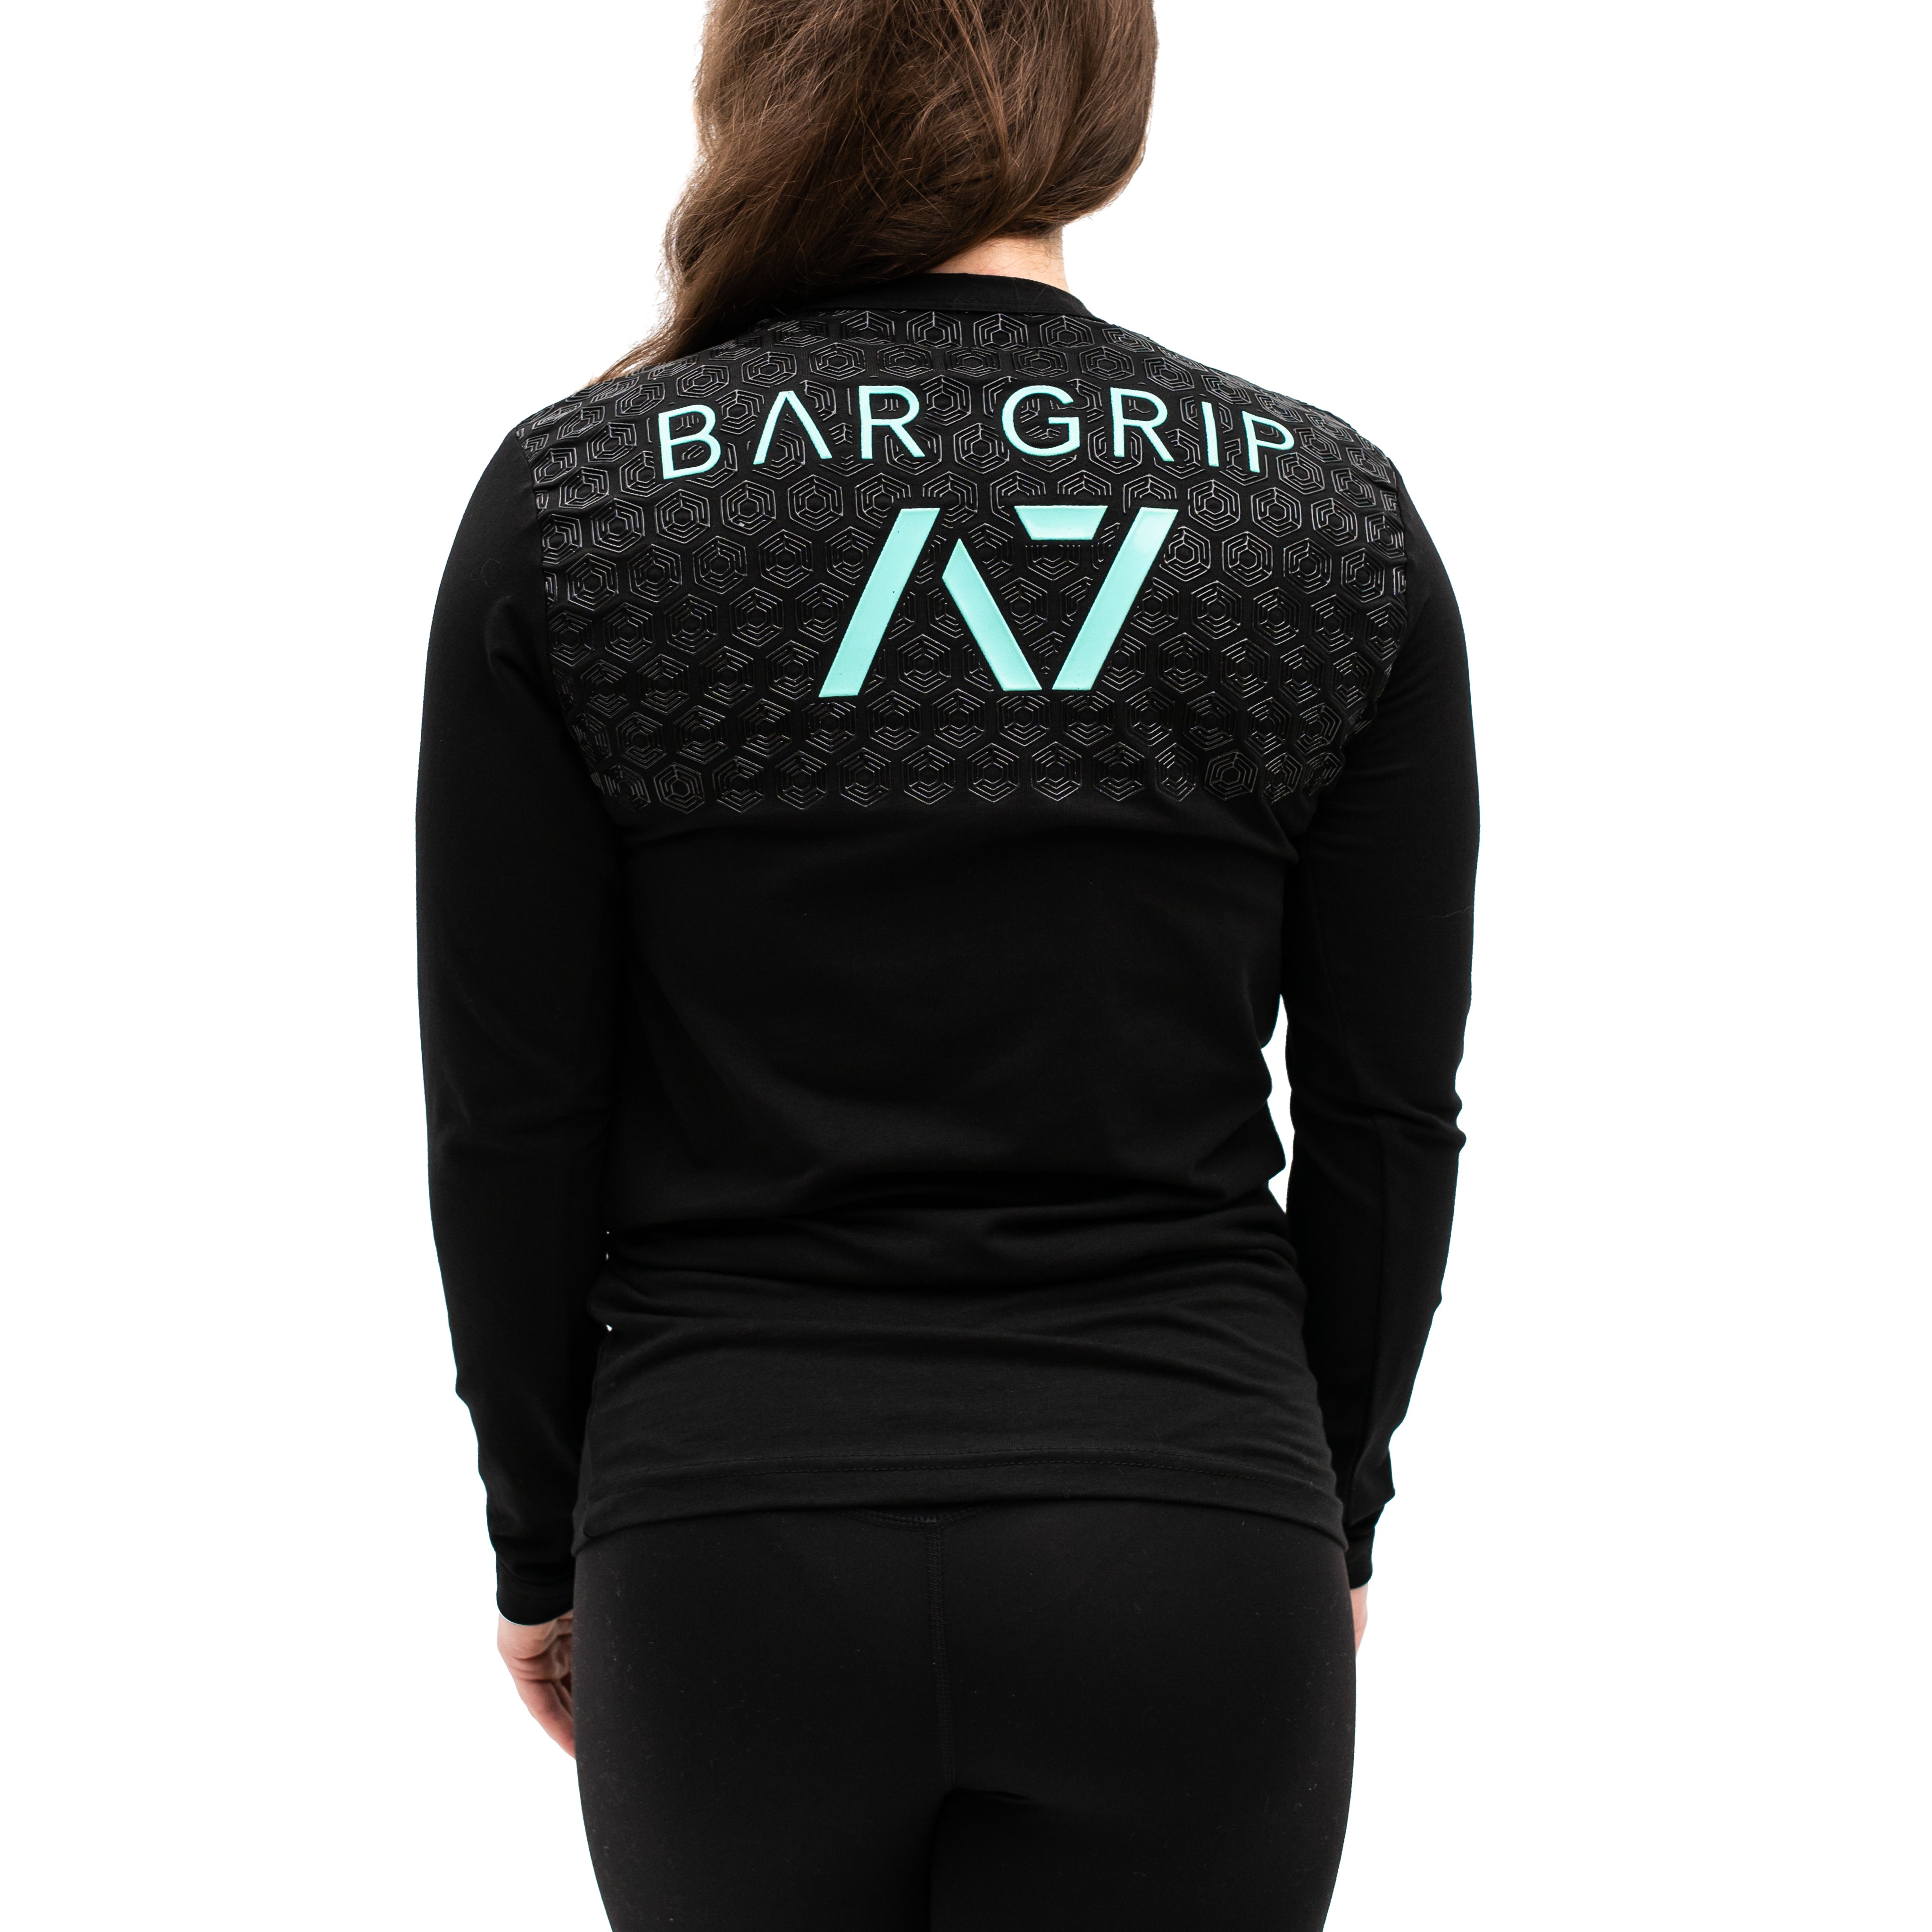  Kilos and Barbells Aqua Bar Grip keeps you warm in the gym. Purchase Kilos and Barbells Aqua Long Sleeve Bar Grip from A7 UK and A7 Europe. The silicone grip helps with slippery commercial benches and bars and anchors the barbell to your back. Kilos and Barbells Aqua Long Sleeve Bar Grip is great for training in a cold gym. A7UK has the best Powerlifting apparel for all your workouts. Available in UK and Europe including France, Italy, Germany, the Netherlands, Sweden and Poland.